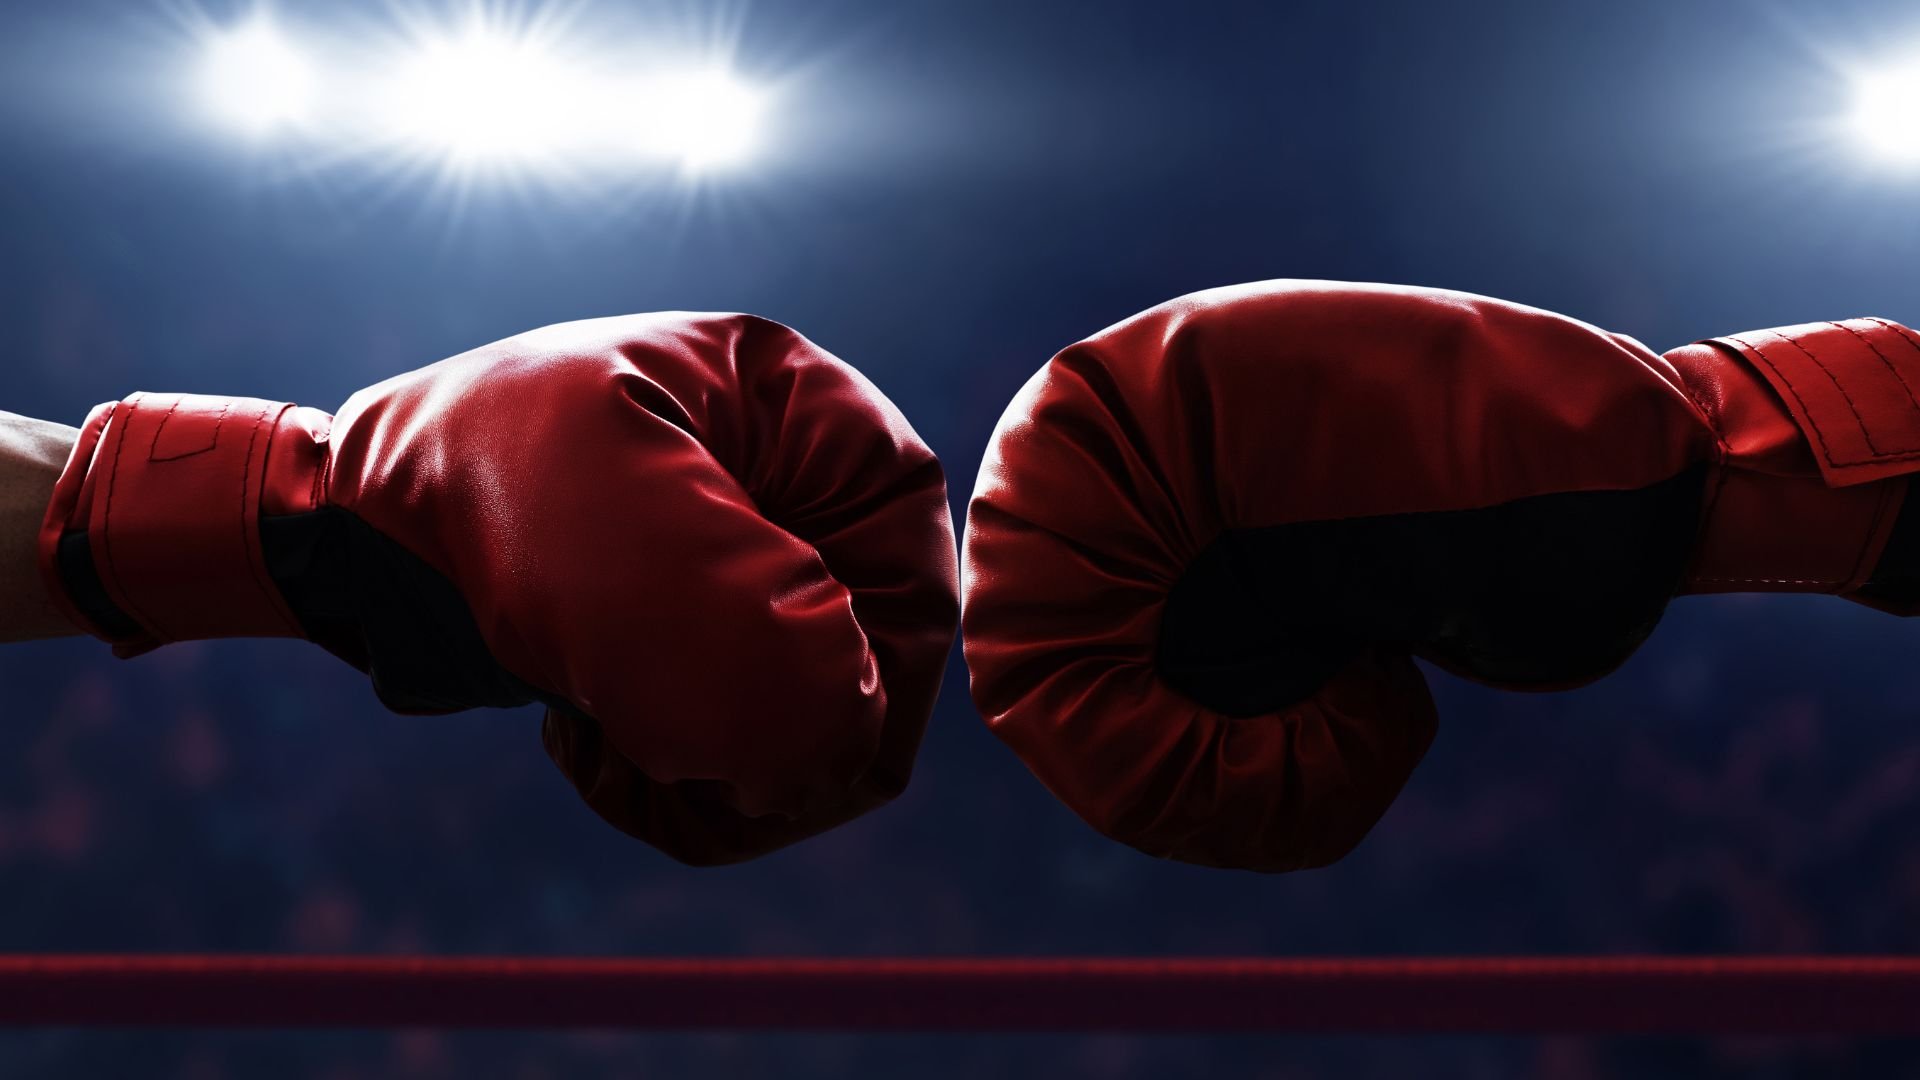 Red punching gloves, Article name: 7 Reasons Everyone Loves to Hate Attribution